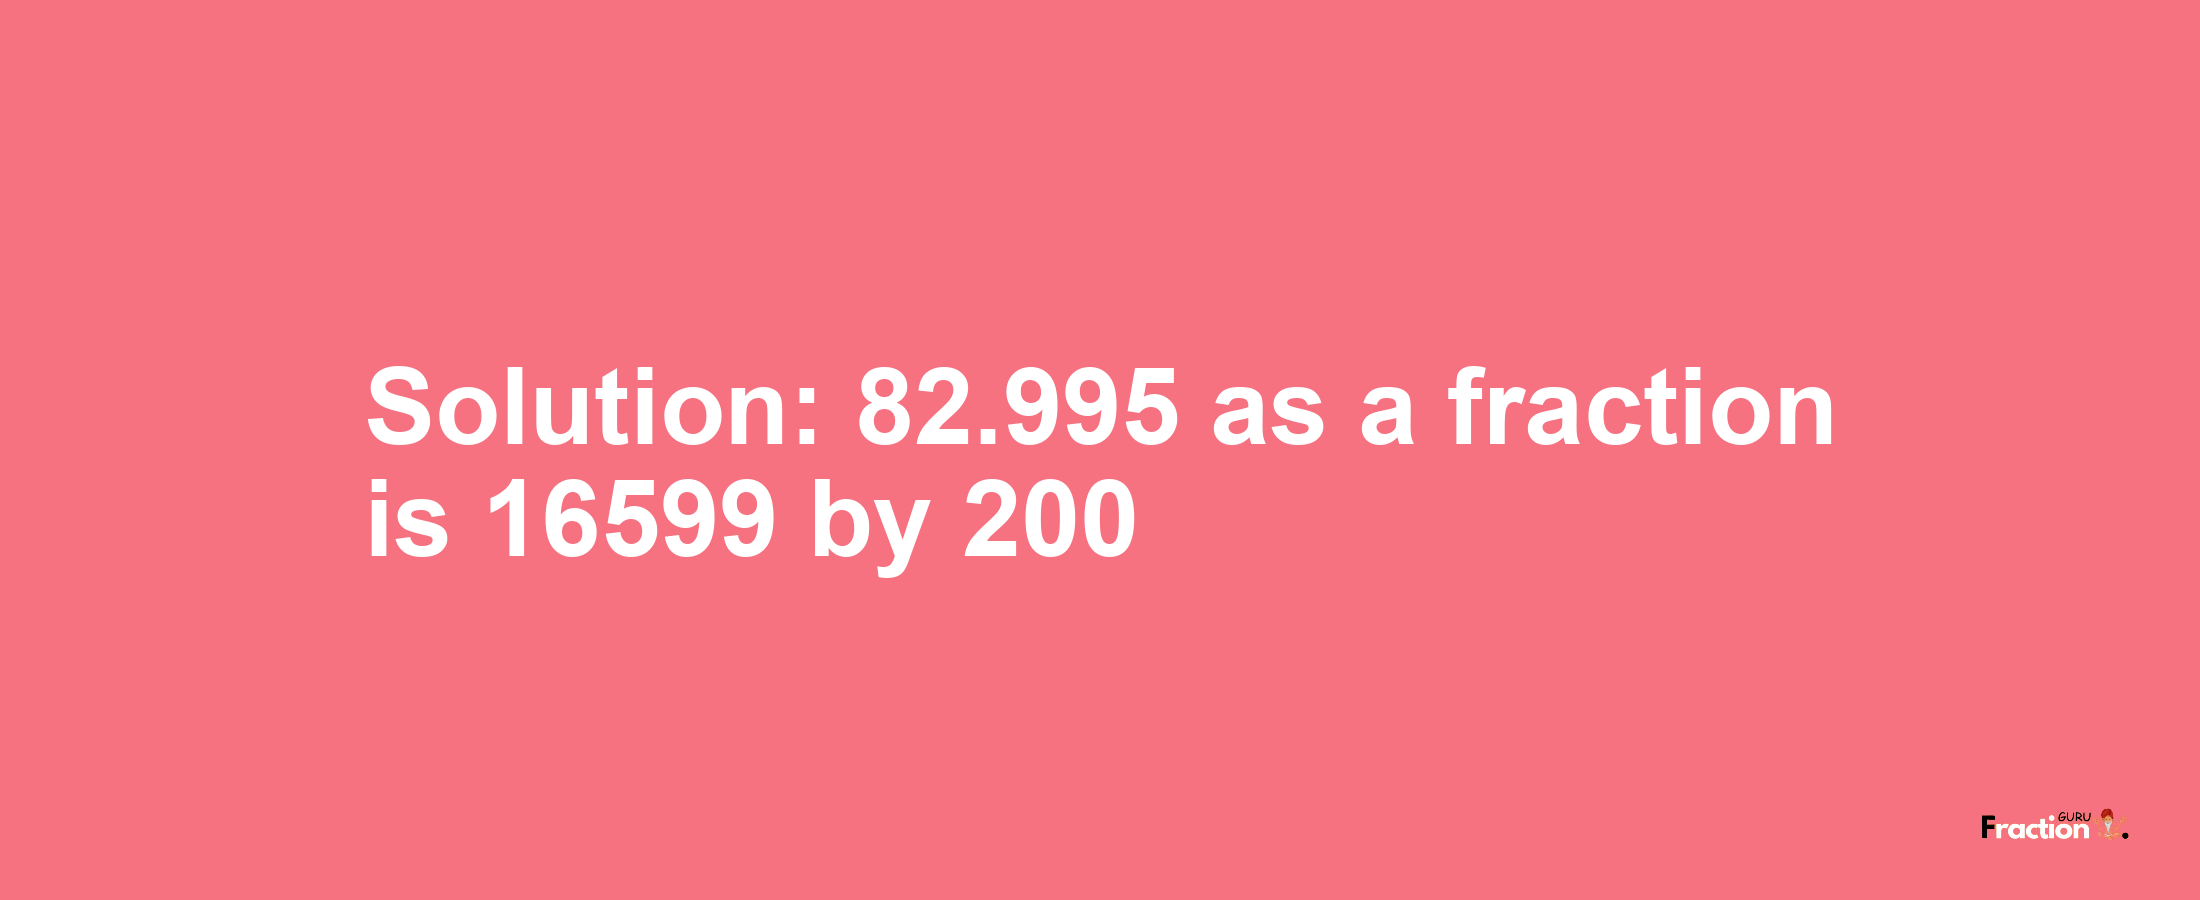 Solution:82.995 as a fraction is 16599/200